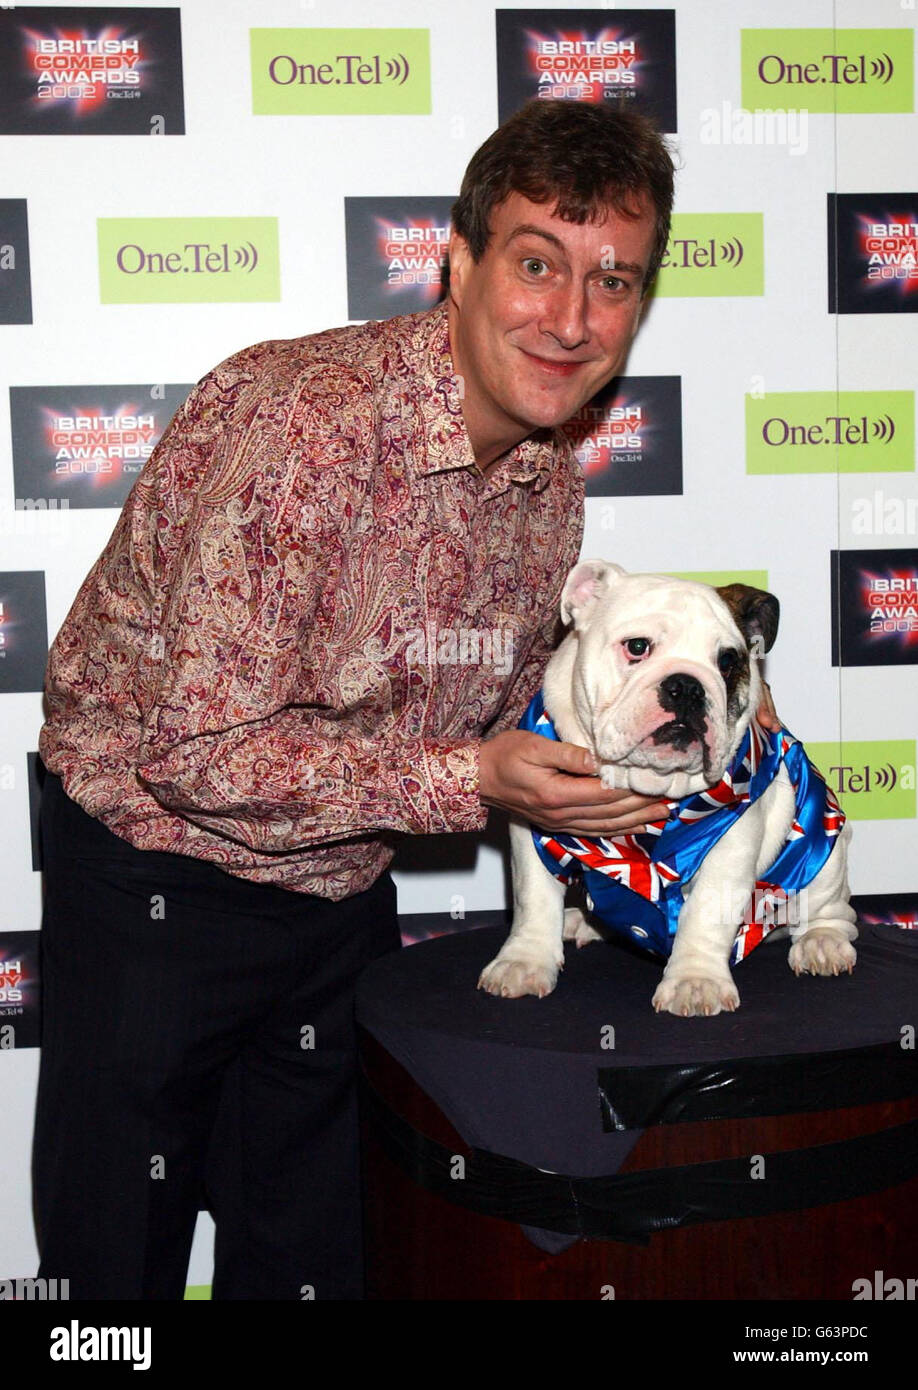 Actor Stephen Tompkinson with a pedigree British bulldog Albert, at the launch party for The British Comedy Awards, at Sway in Covent Garden, London. Stock Photo